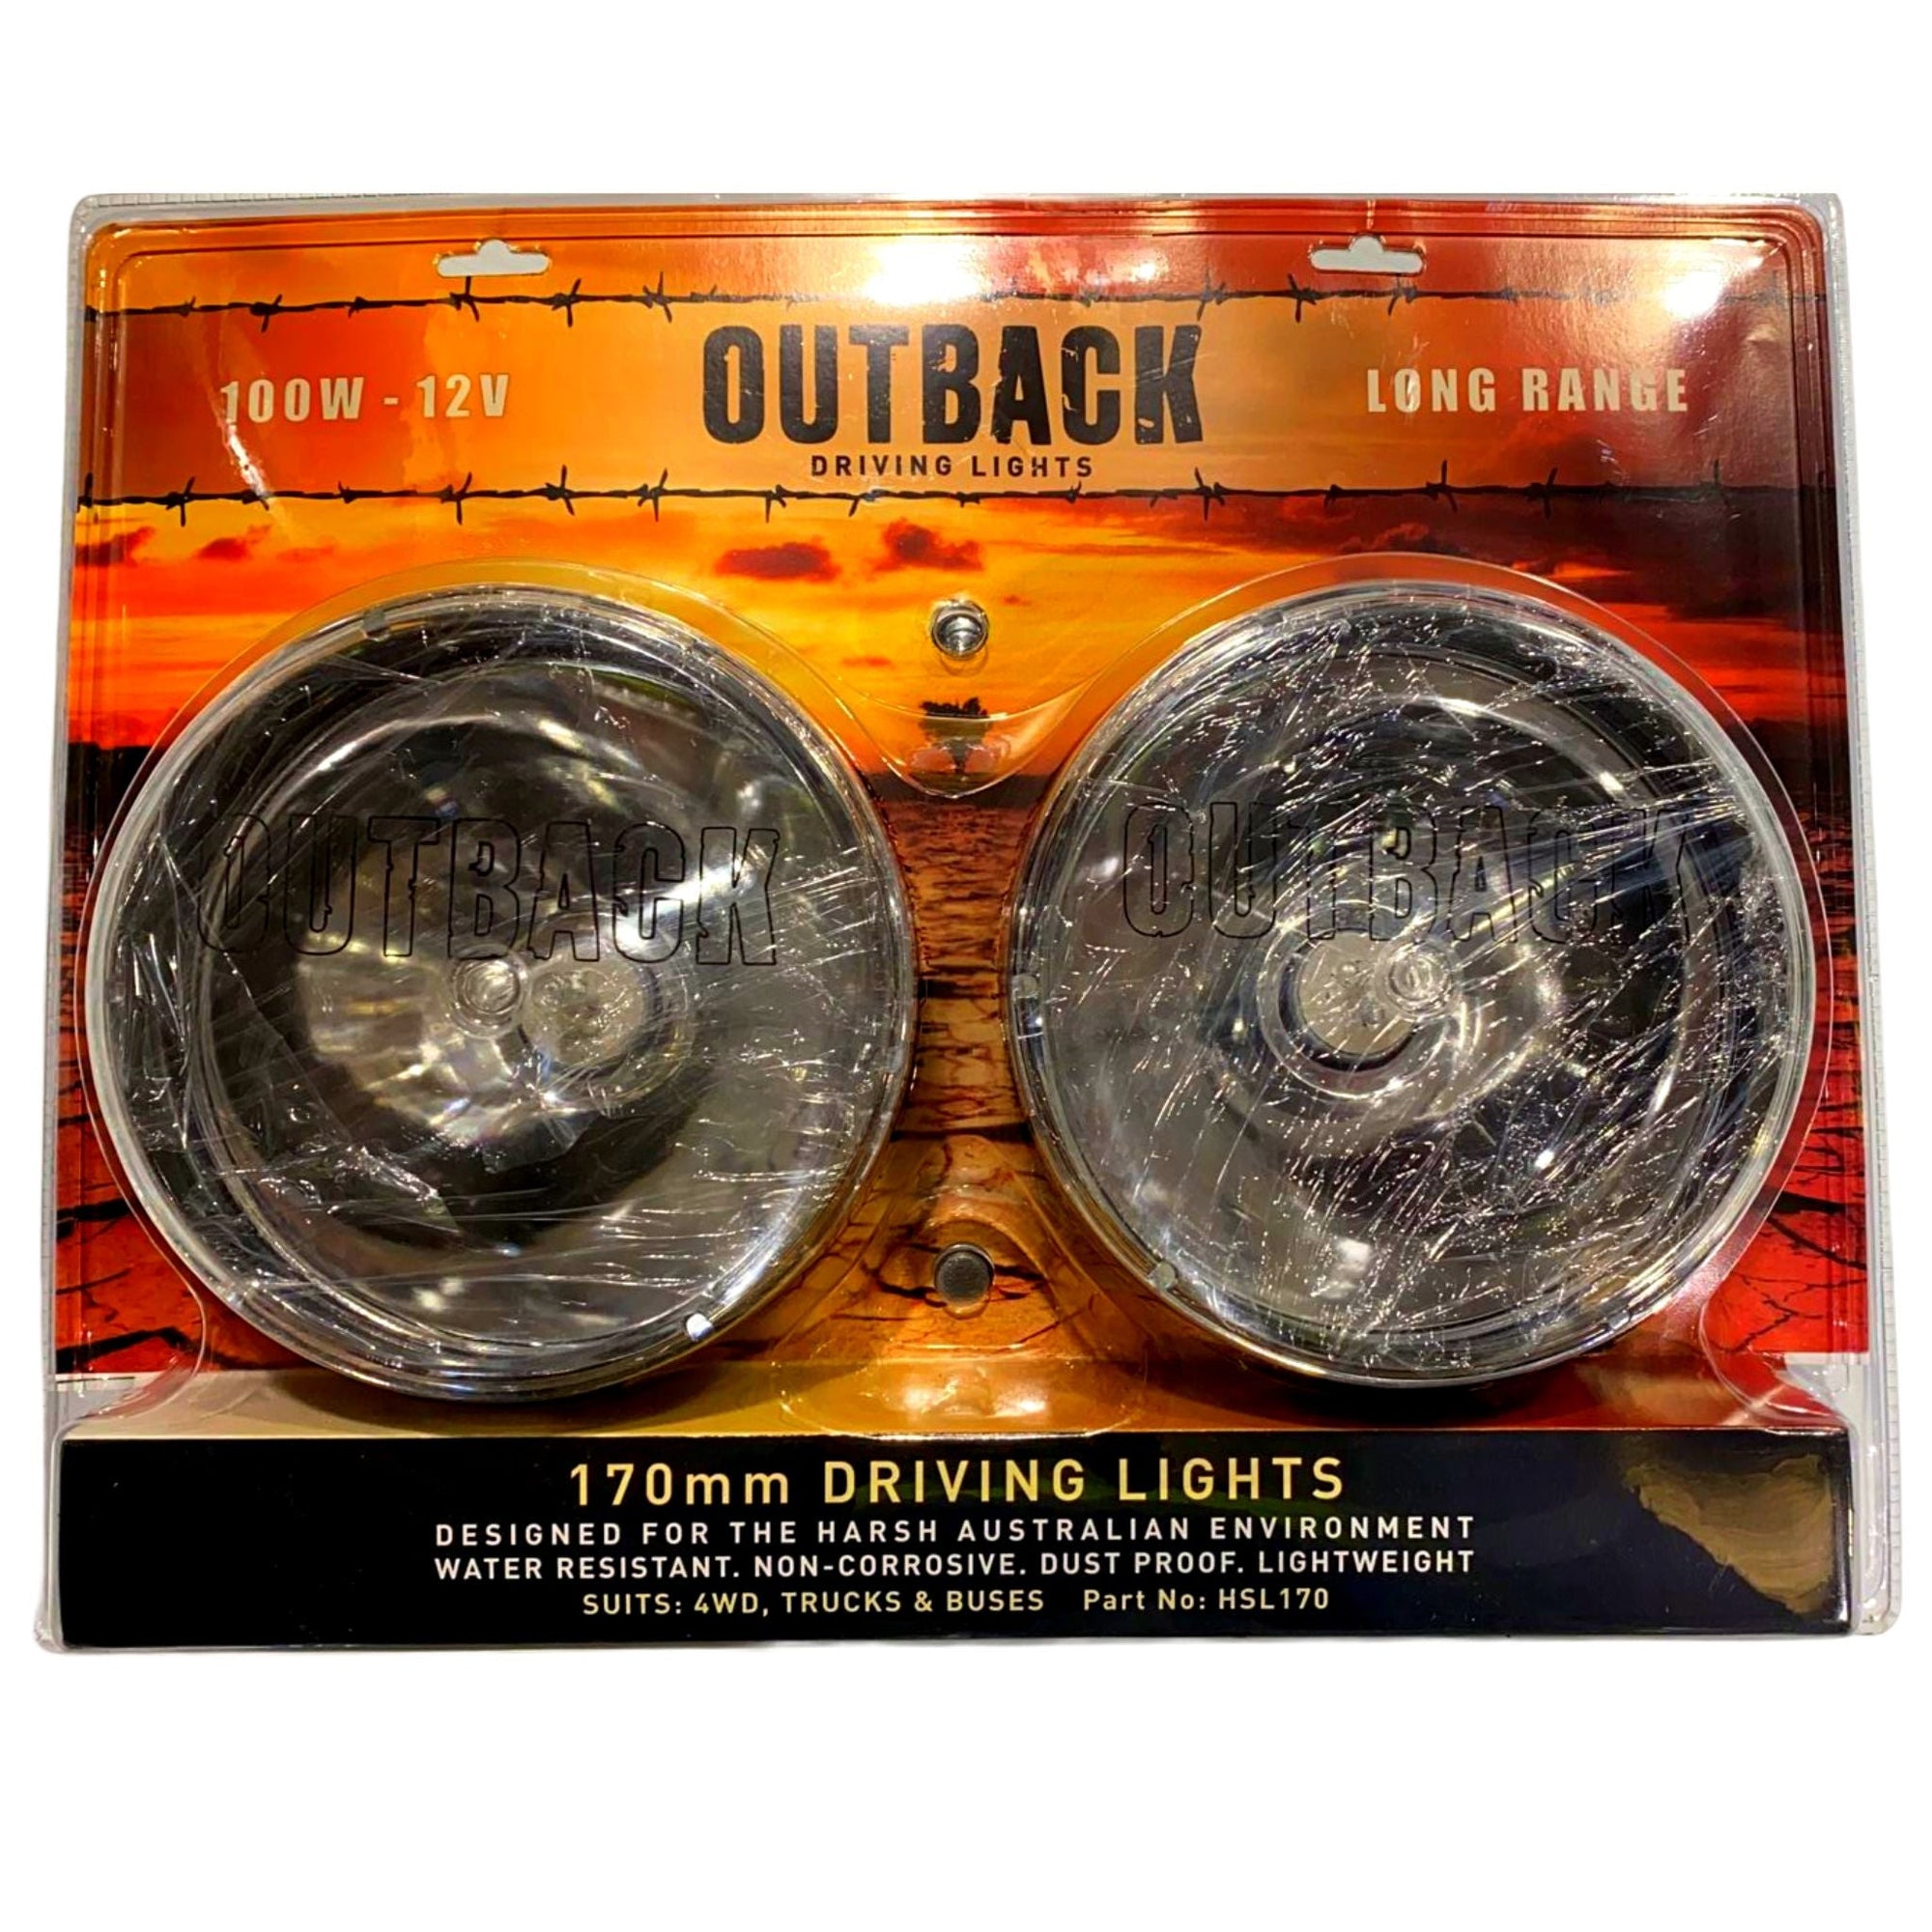 Outback Driving Lights (Twin Pack) - 100W - 12V (LONG RANGE) - HSL170 - South East Clearance Centre